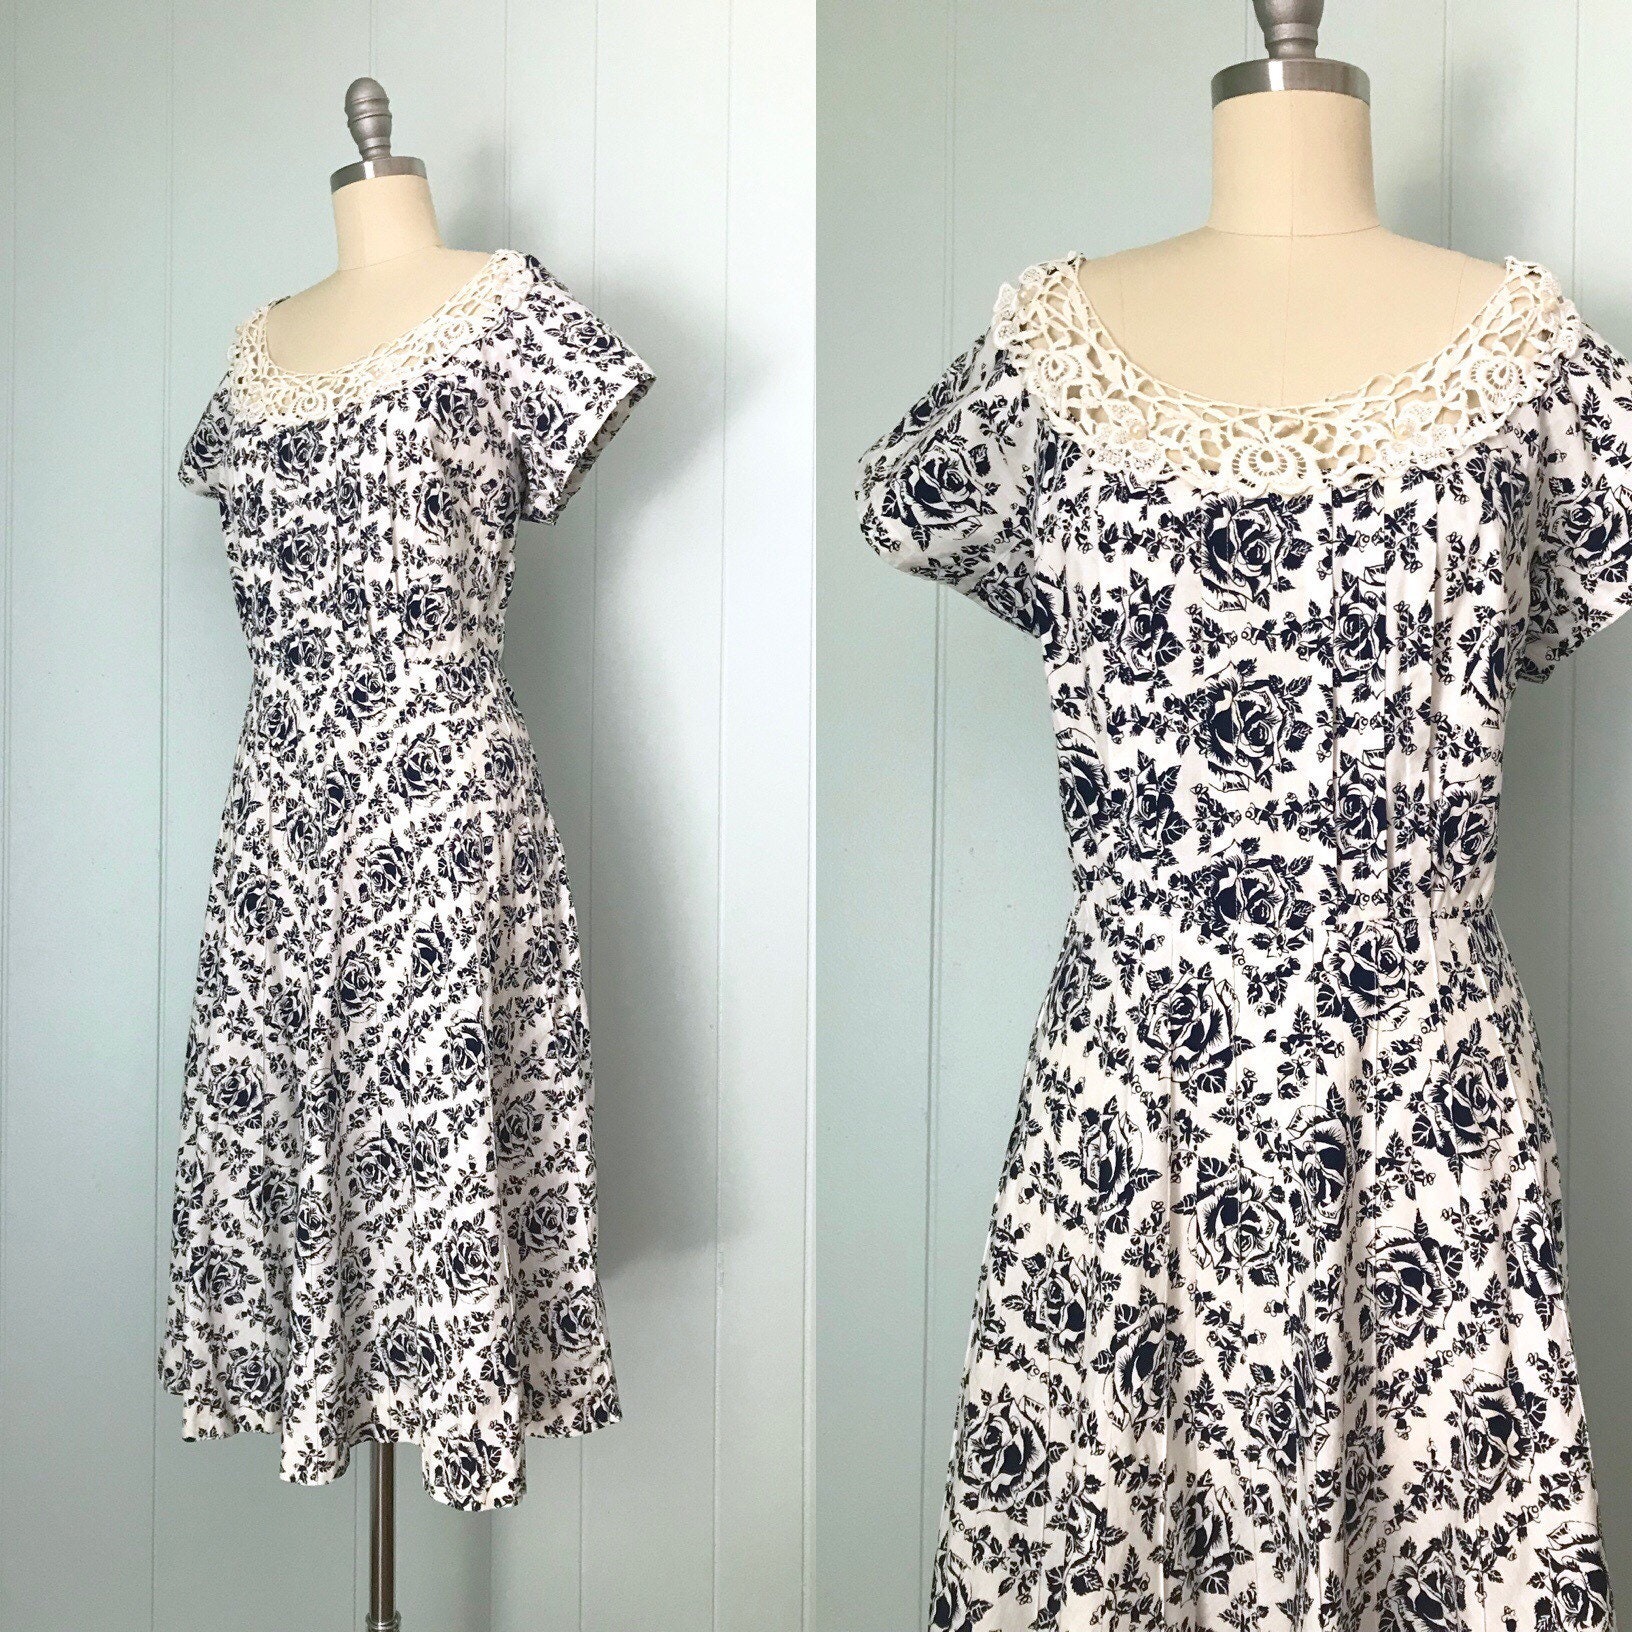 1950s Navy Blue Rose Print Party Dress 50s White Floral - Etsy